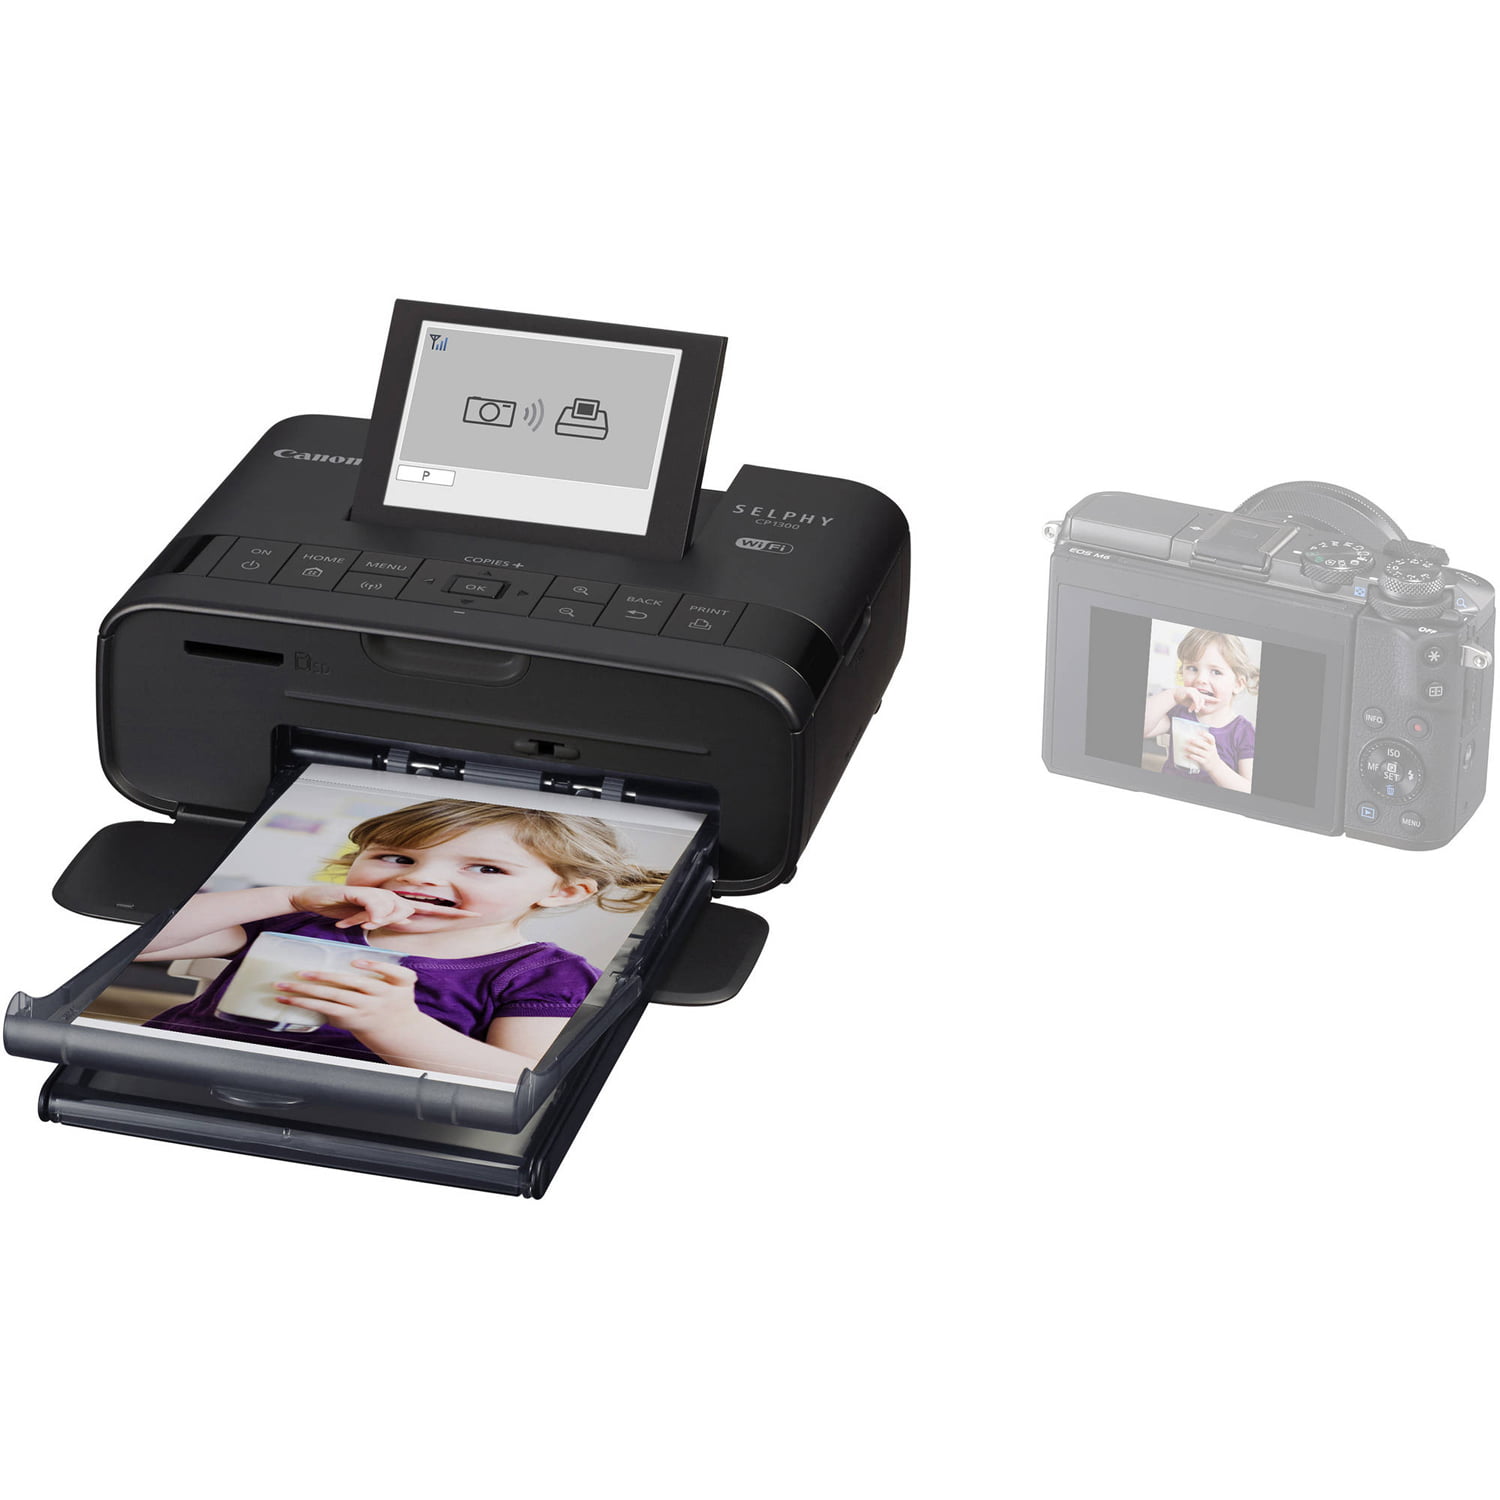 Canon SELPHY CP1300 Wireless Compact Photo Printer Black USB Printer Cable + Xtech Custom Case Produces up to 108 of 4 x 6 prints + Canon KP-108IN Color Ink Paper Set HeroFiber Cleaning Clot